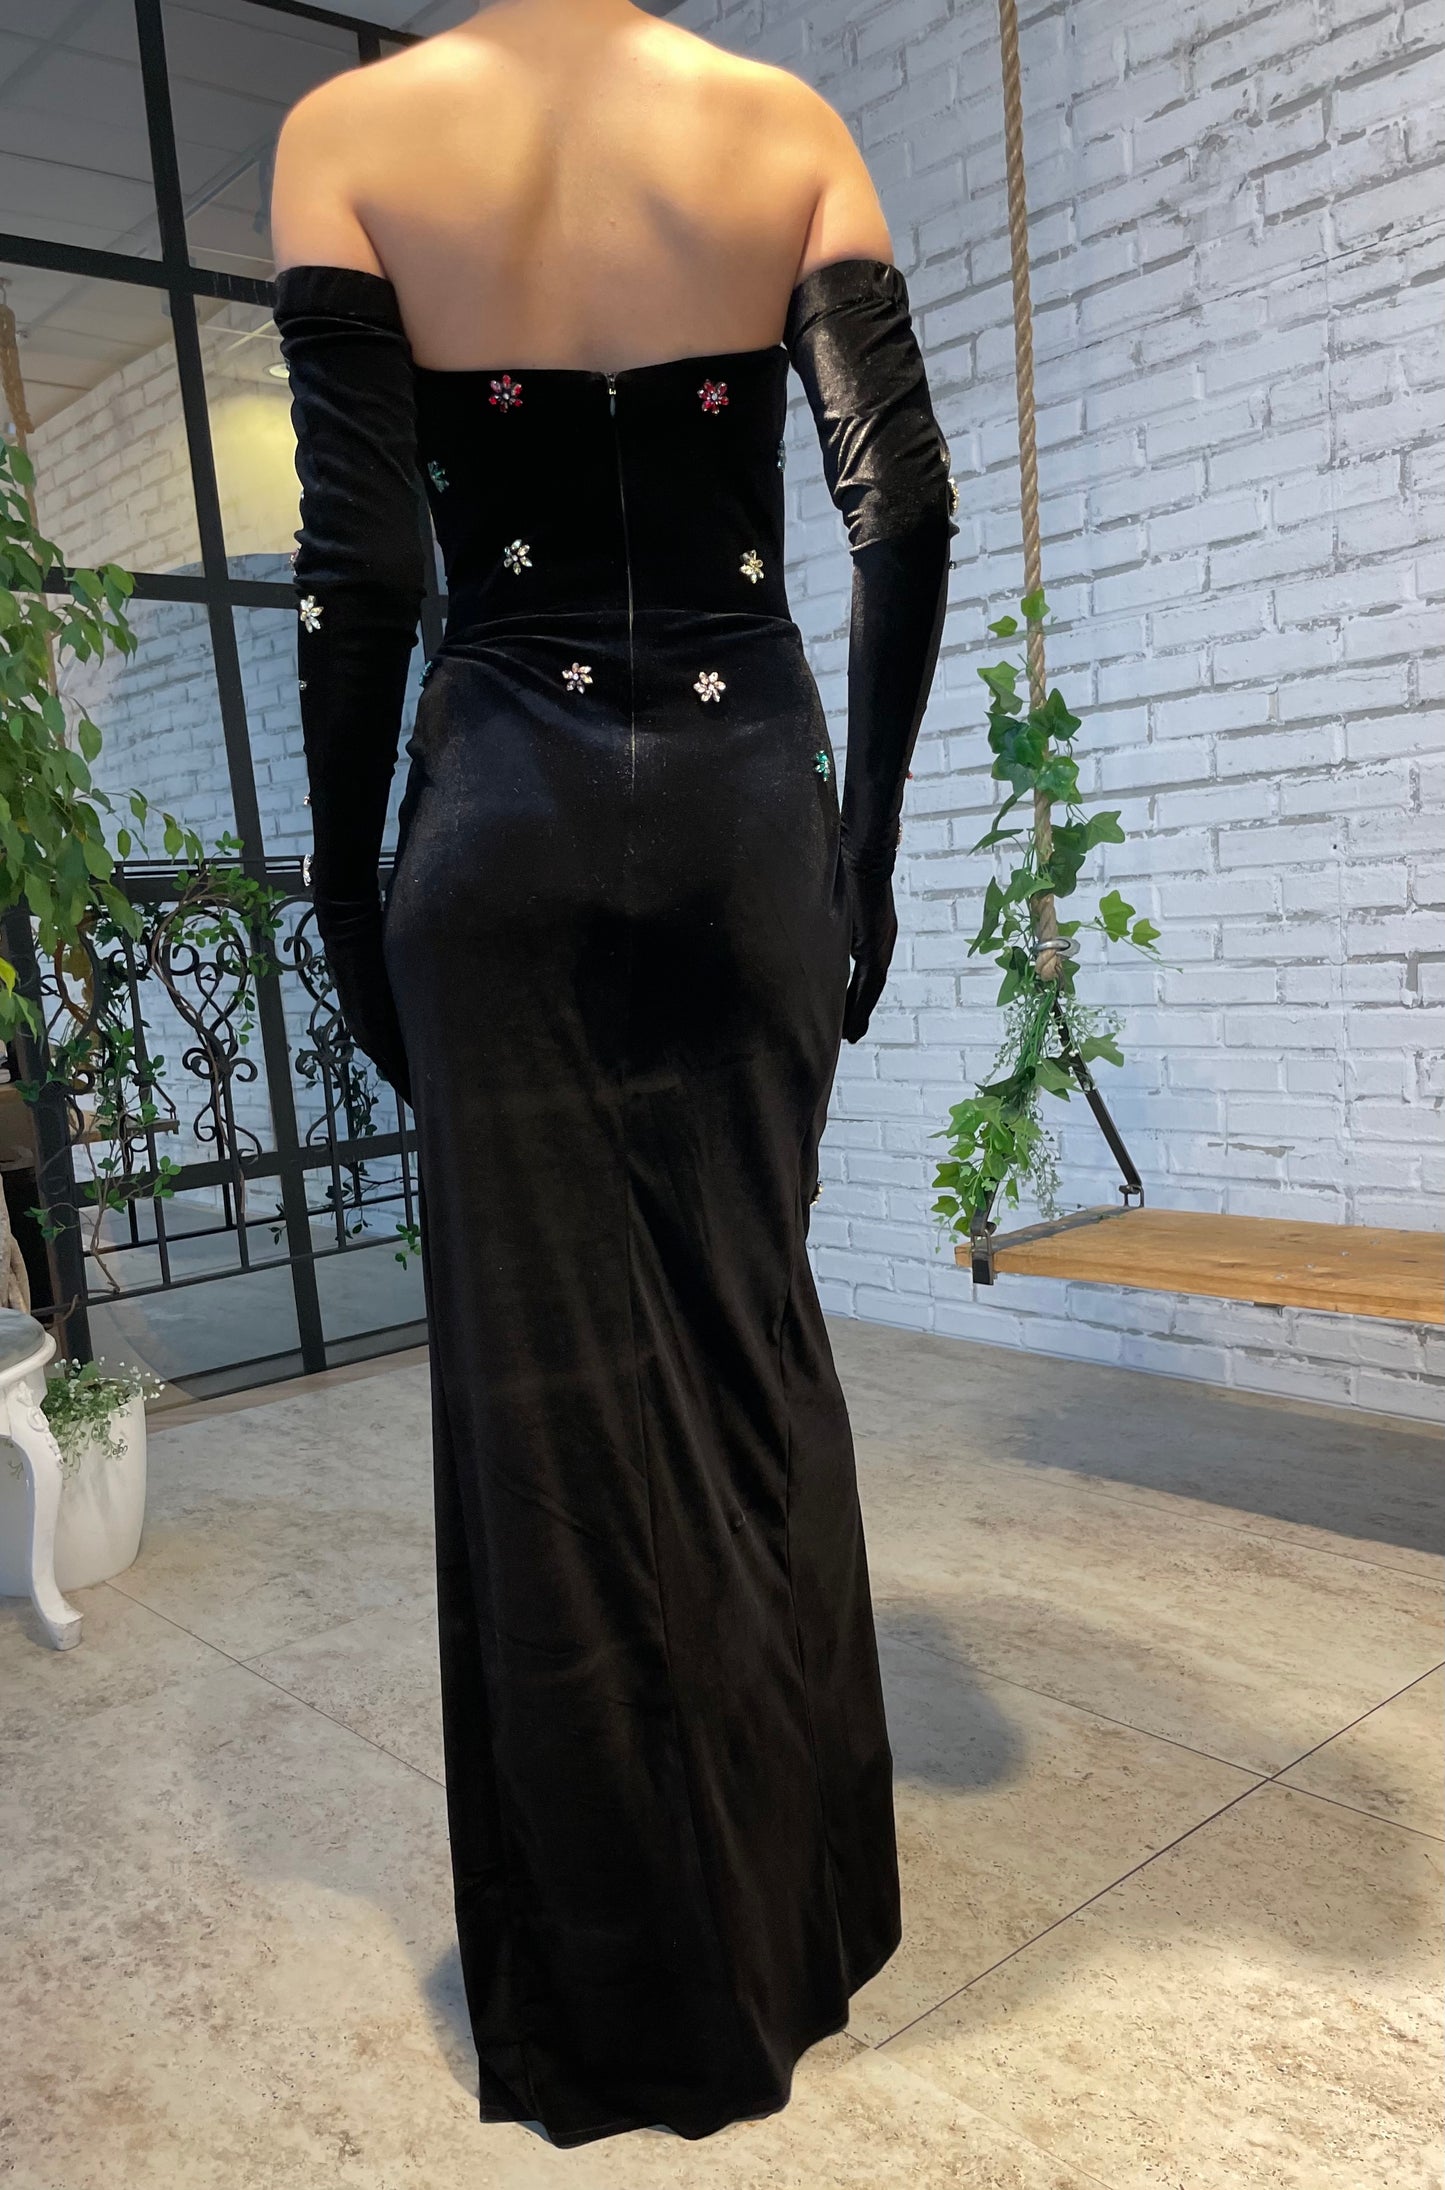 Black mermaid dress with gloves and embroidery